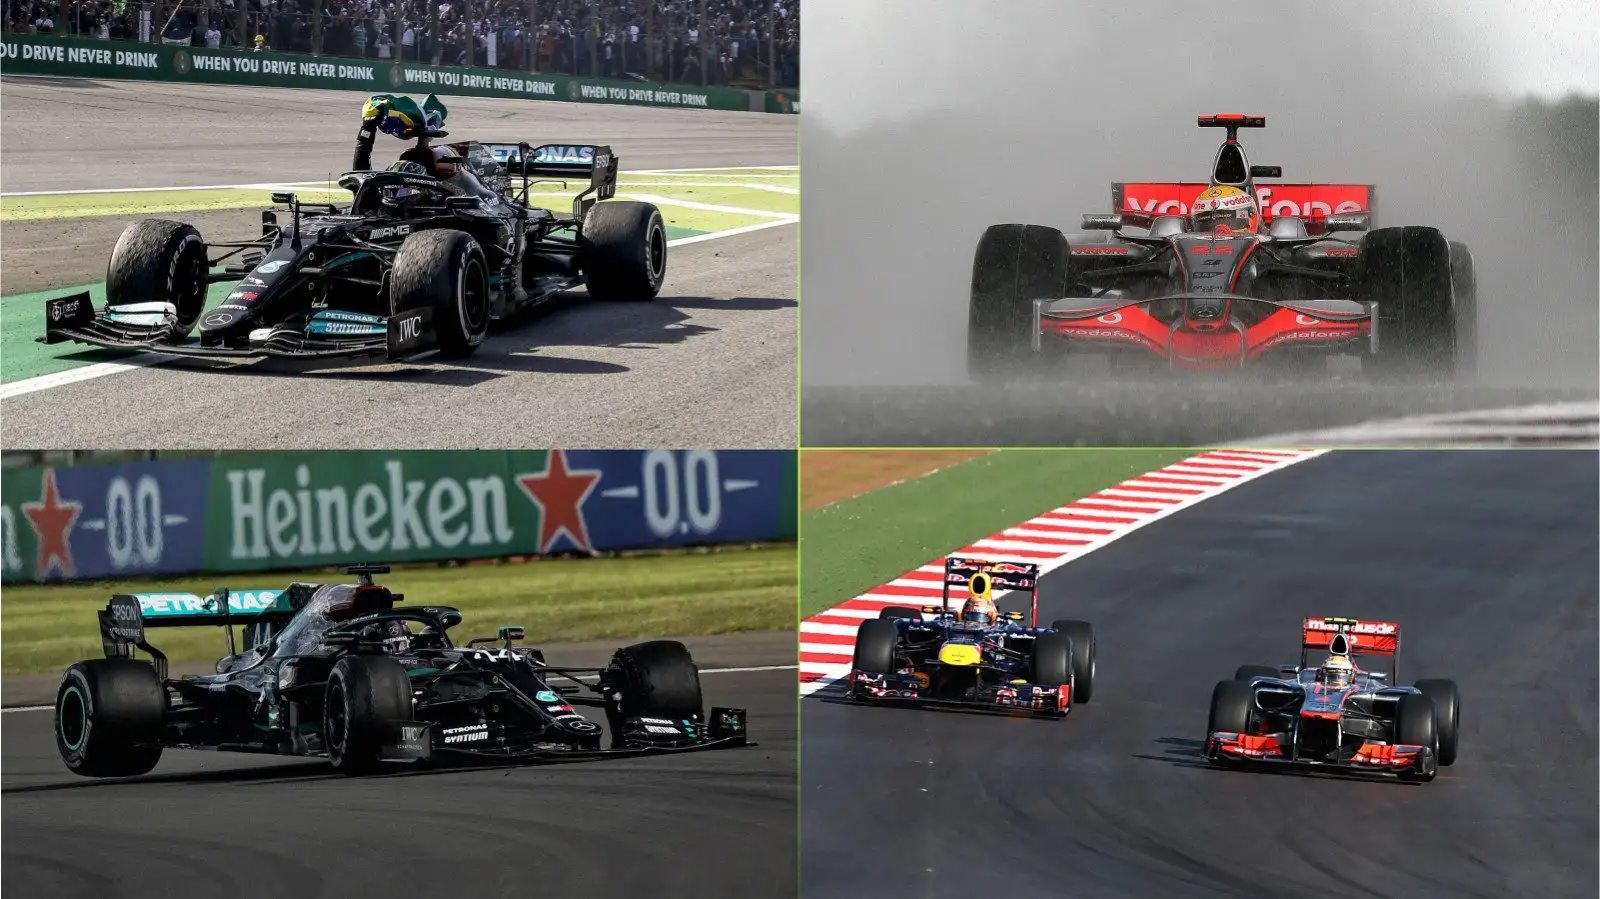 Lewis Hamilton winning different races during his long F1 career.